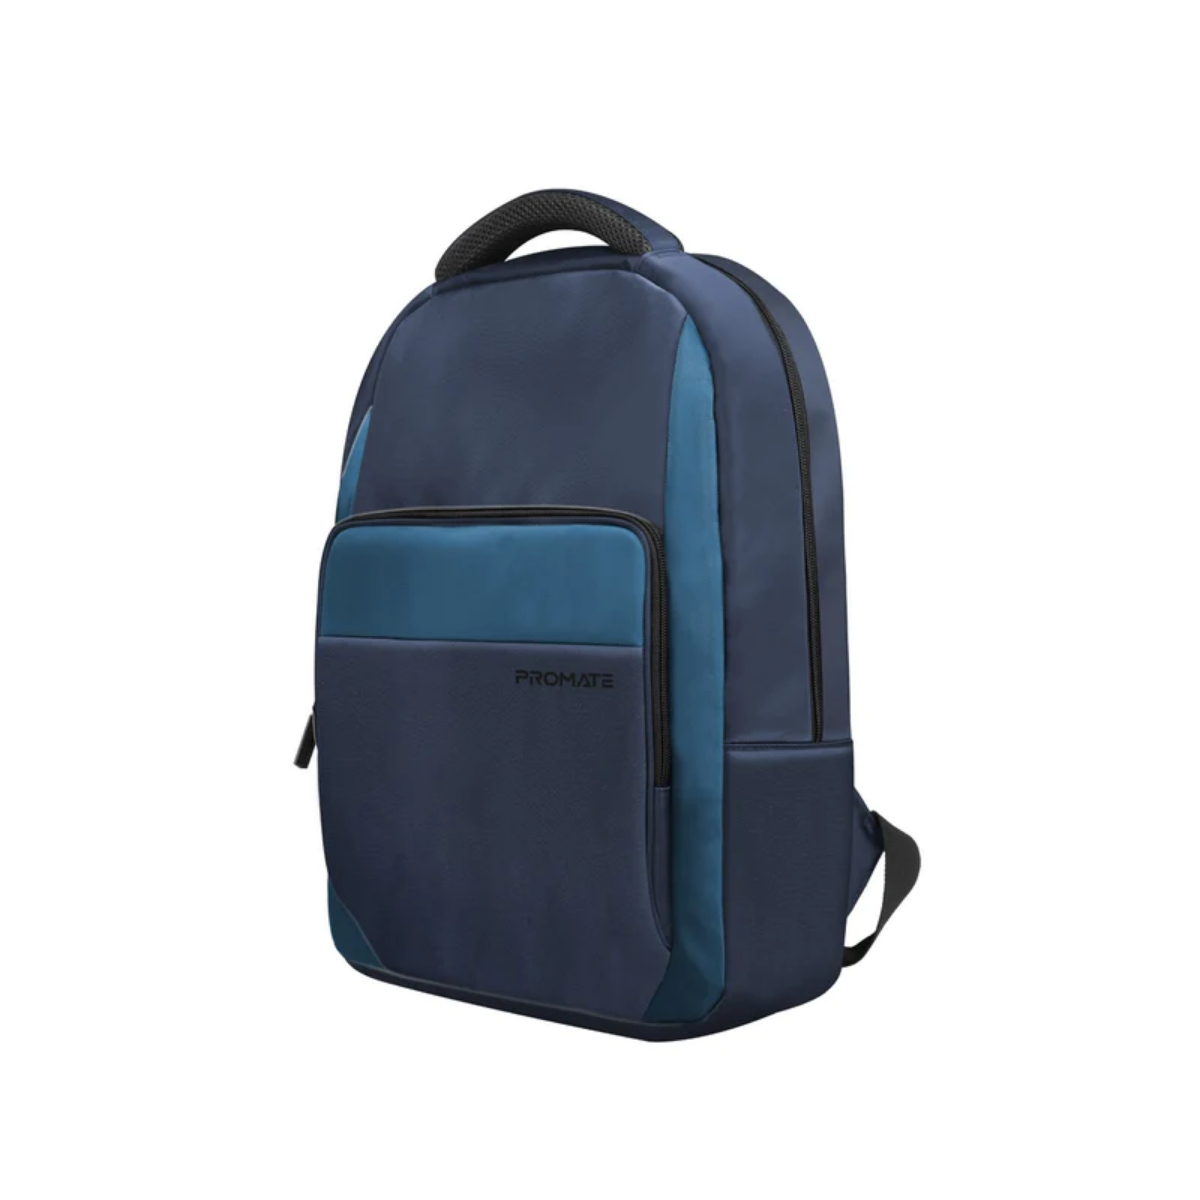 Large Capacity Backpack with Multiple Compartments for 15.6” Laptops Blue